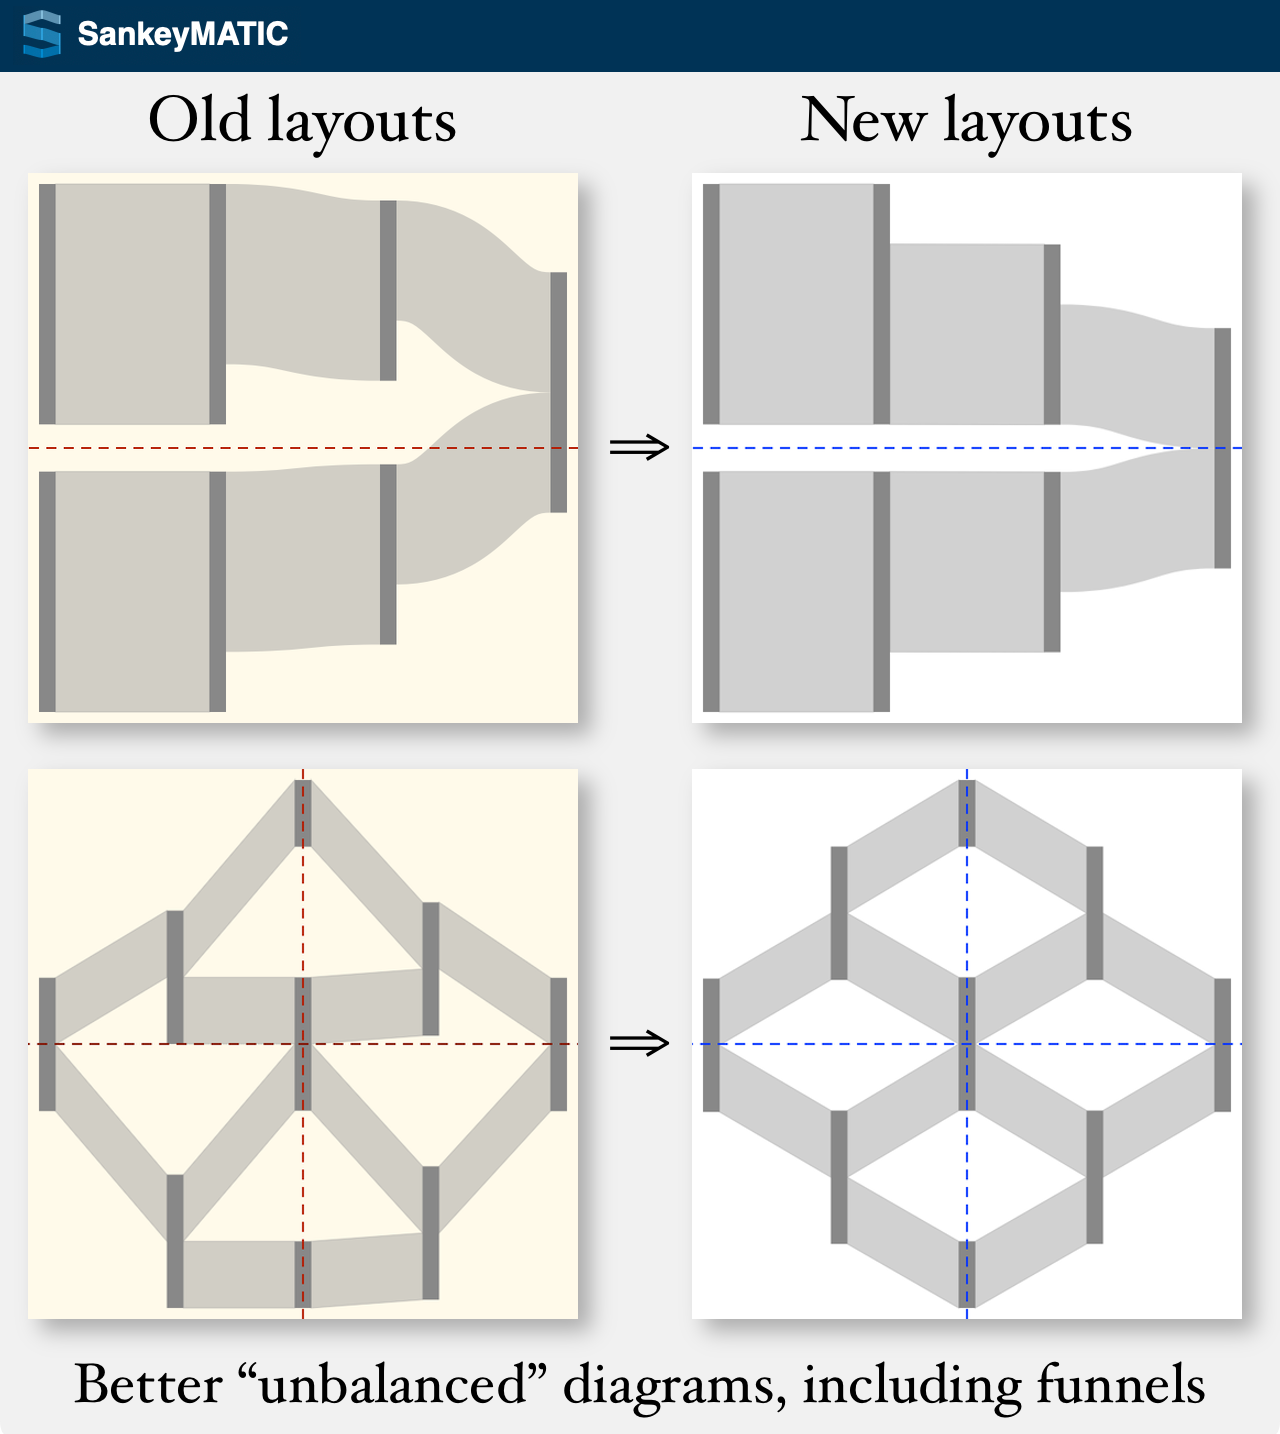 2 pairs of before & after images showing off the new SankeyMATIC layout algorithm. The first pair shows nodes losing value as they proceed through stages; eventually they converge on a single final node. The second pair shows a single node feeding into 2 nodes which gain value from nowhere and eventually converge back to one node; the effect is to produce a diamond-shaped diagram. At the bottom is the text: Better 'unbalanced' diagrams, including funnels.'